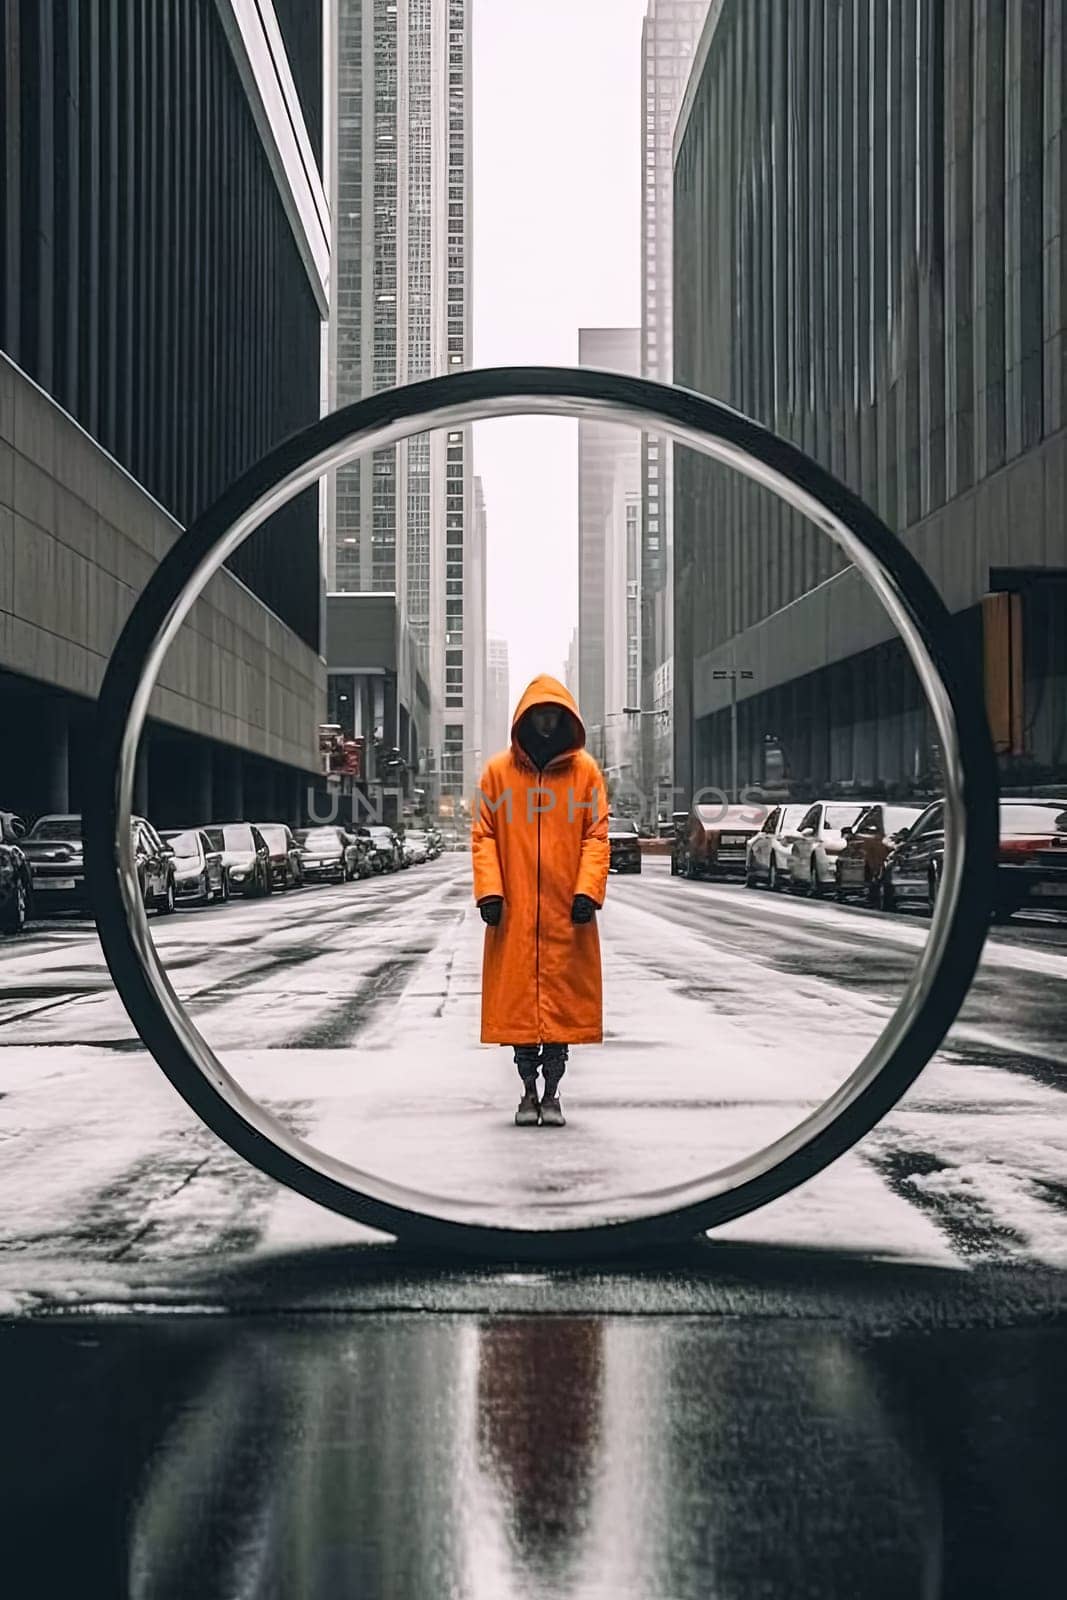 A woman in an orange coat stands in front of a large circular structure. The scene is set in a city with cars and buildings in the background. The woman is posing for a photo